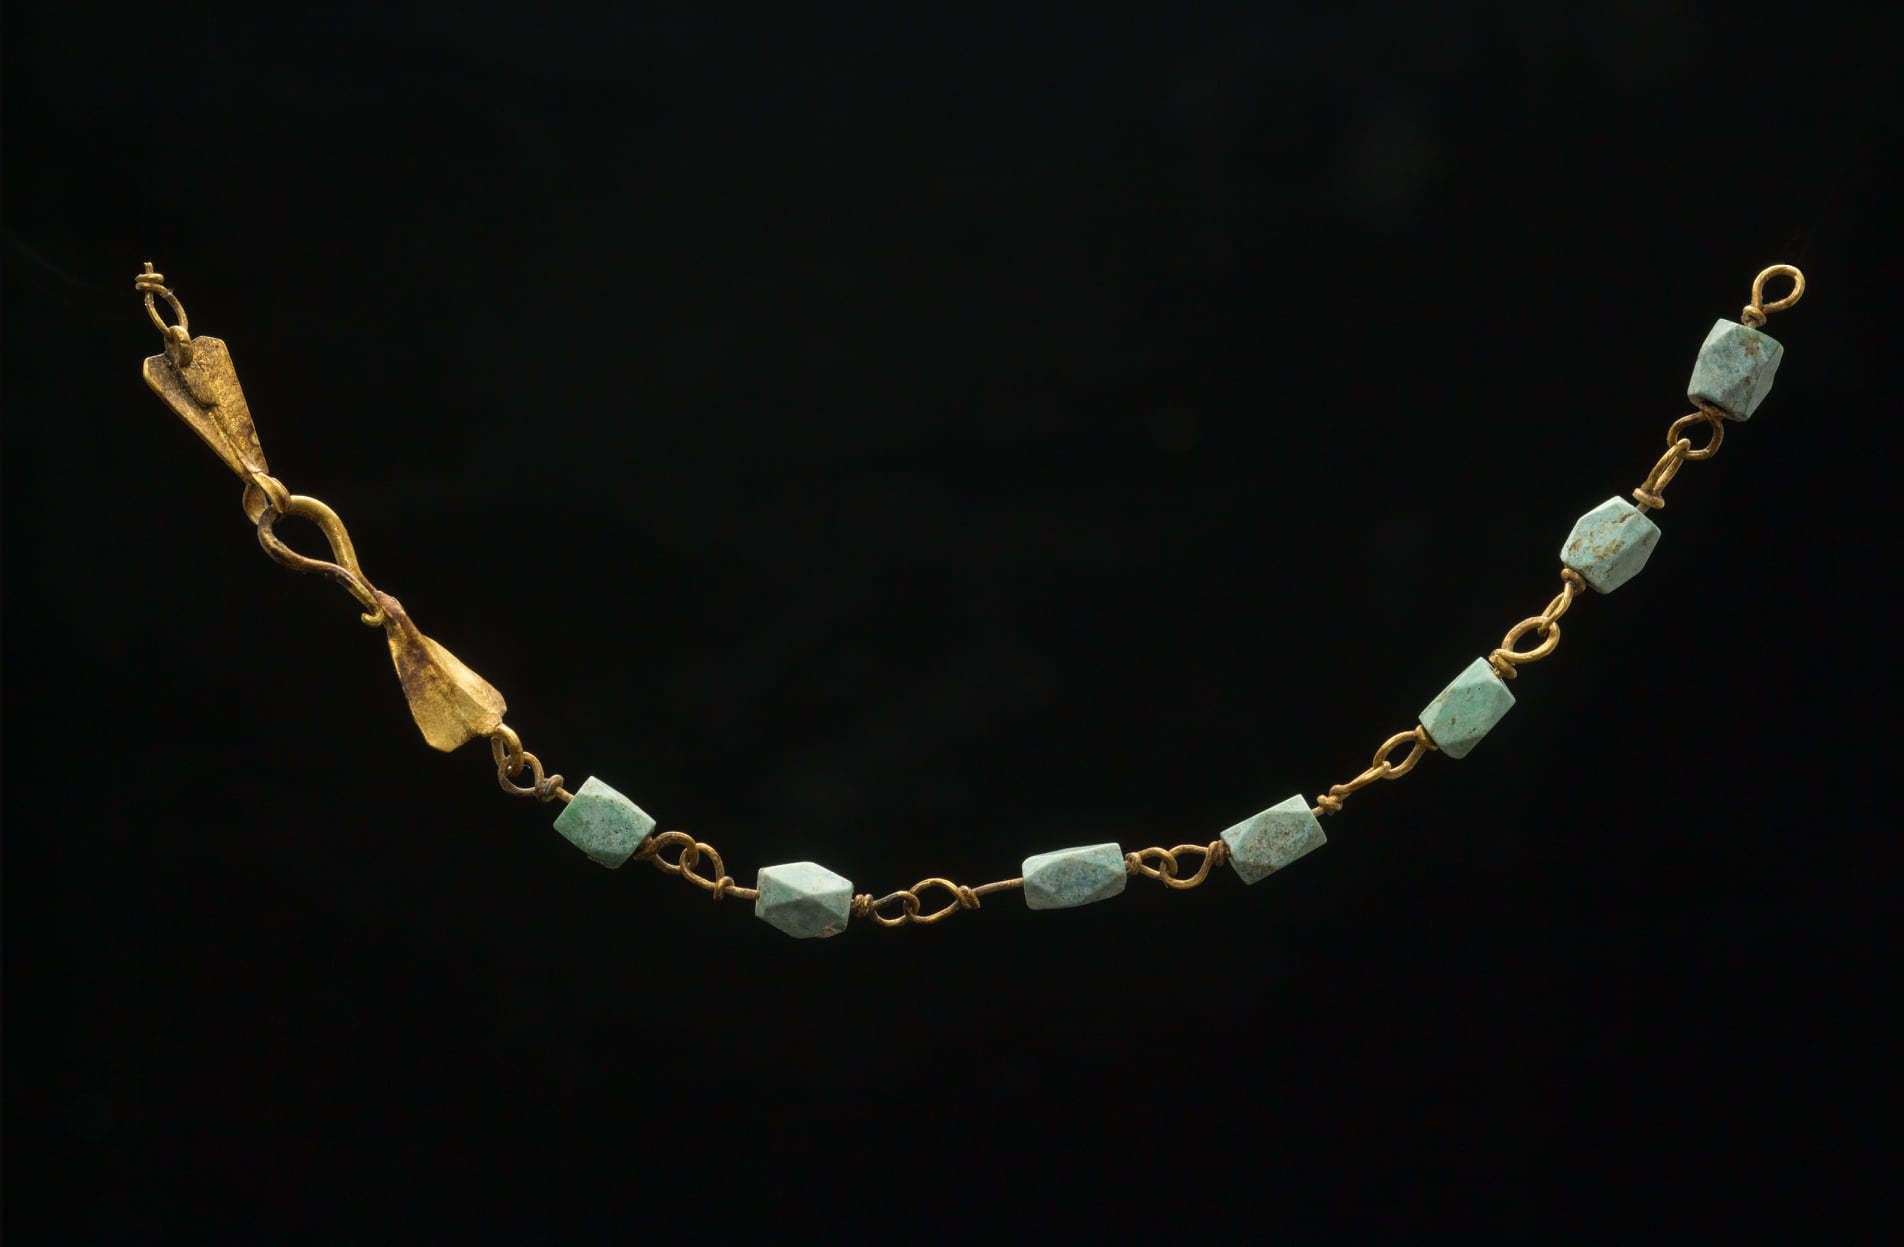 A gold filigree and variscite necklace from Grange Farm. Evidence suggests it could have been turned into a child's bracelet. Image from Pre-Construct Archaeology